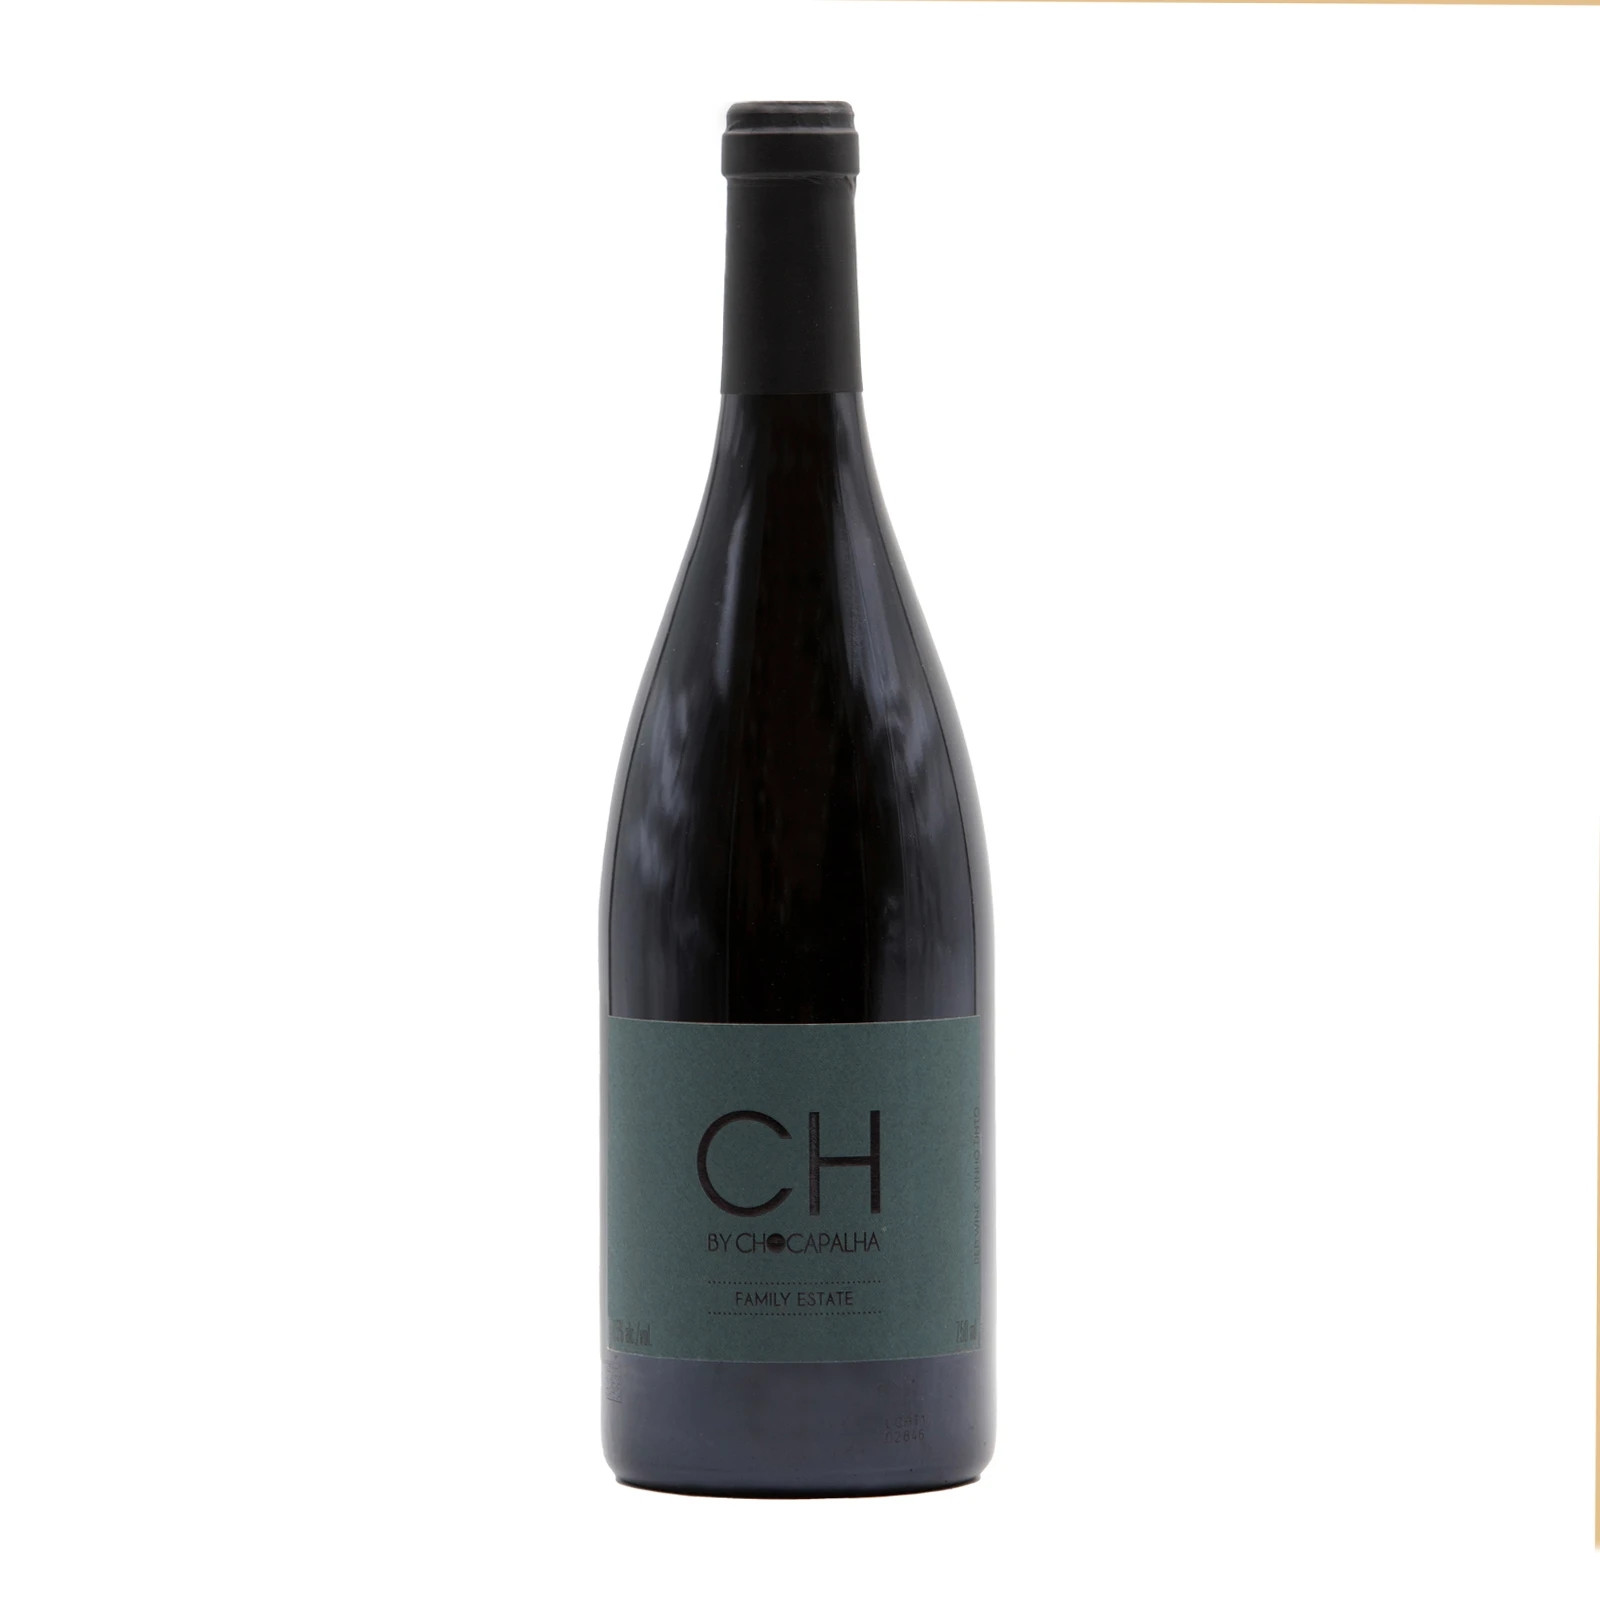 Ch By Chocapalha Rot 2019